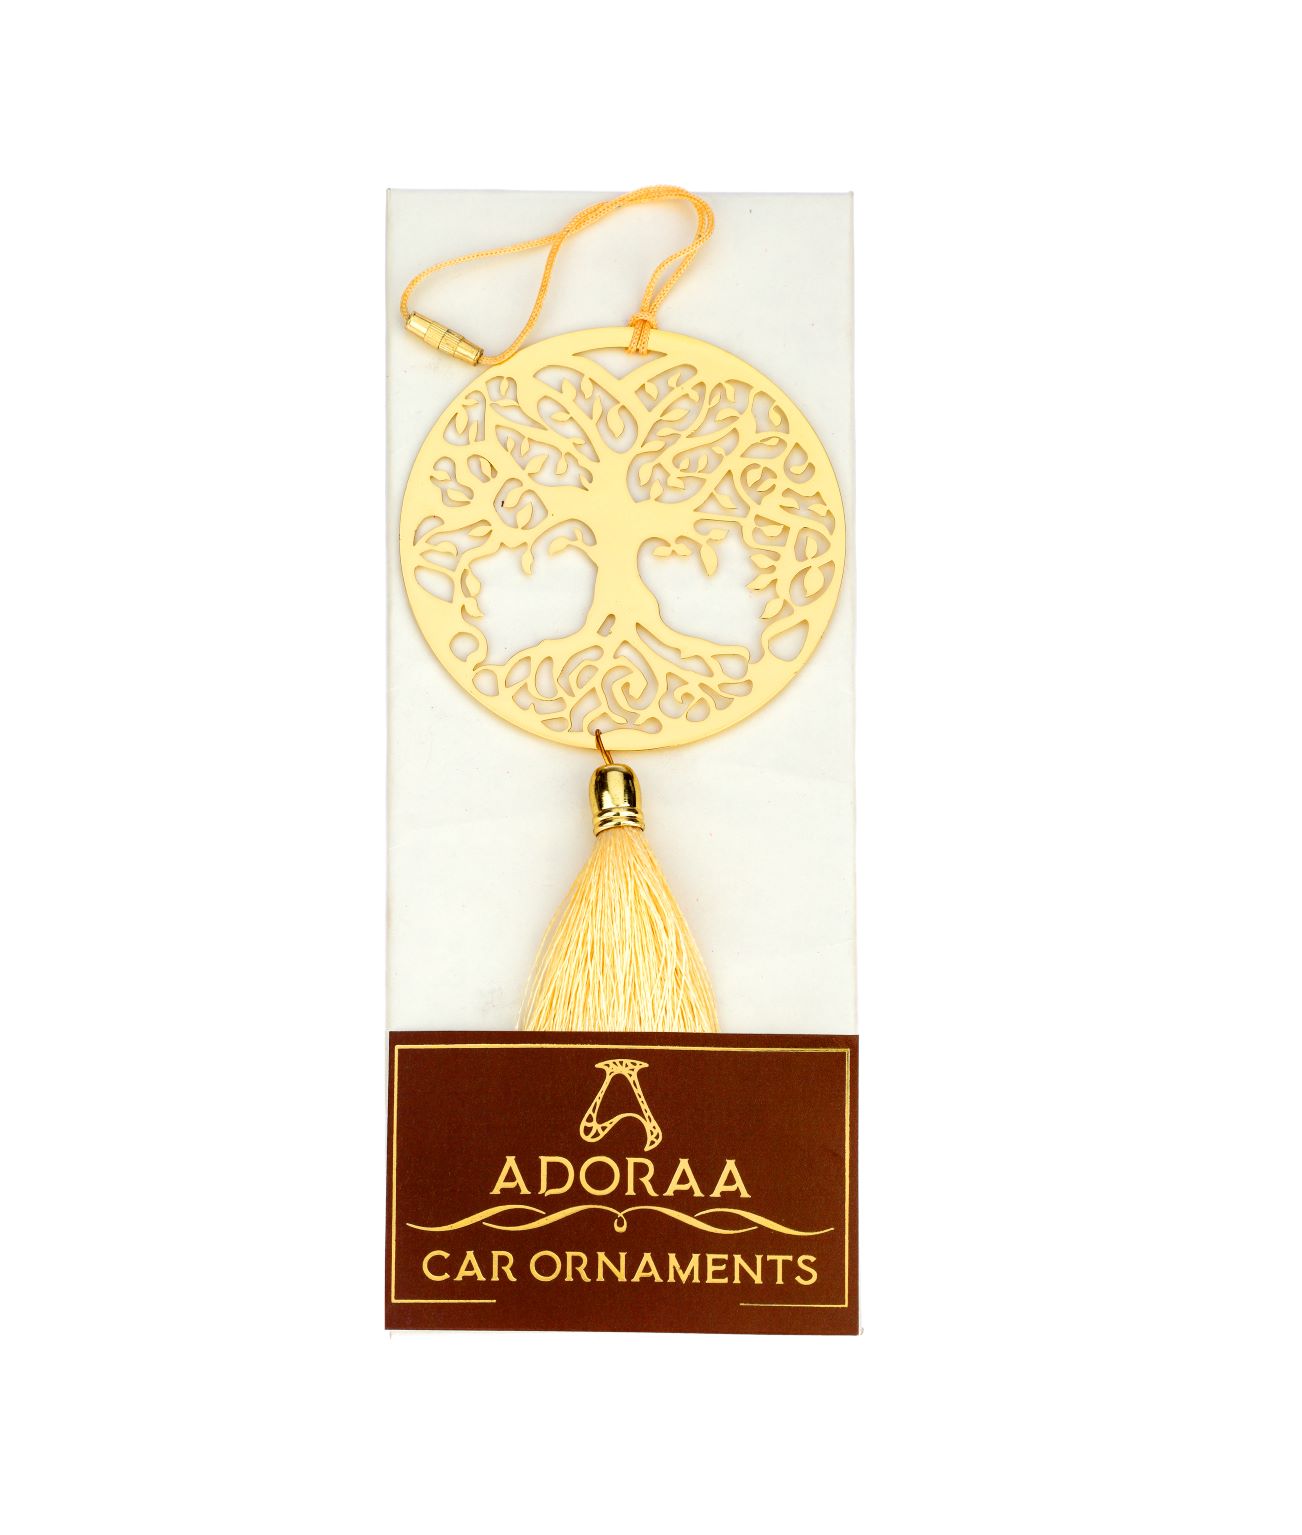 Tree of Life Car rear view mirror hanging décor accessories in Brass